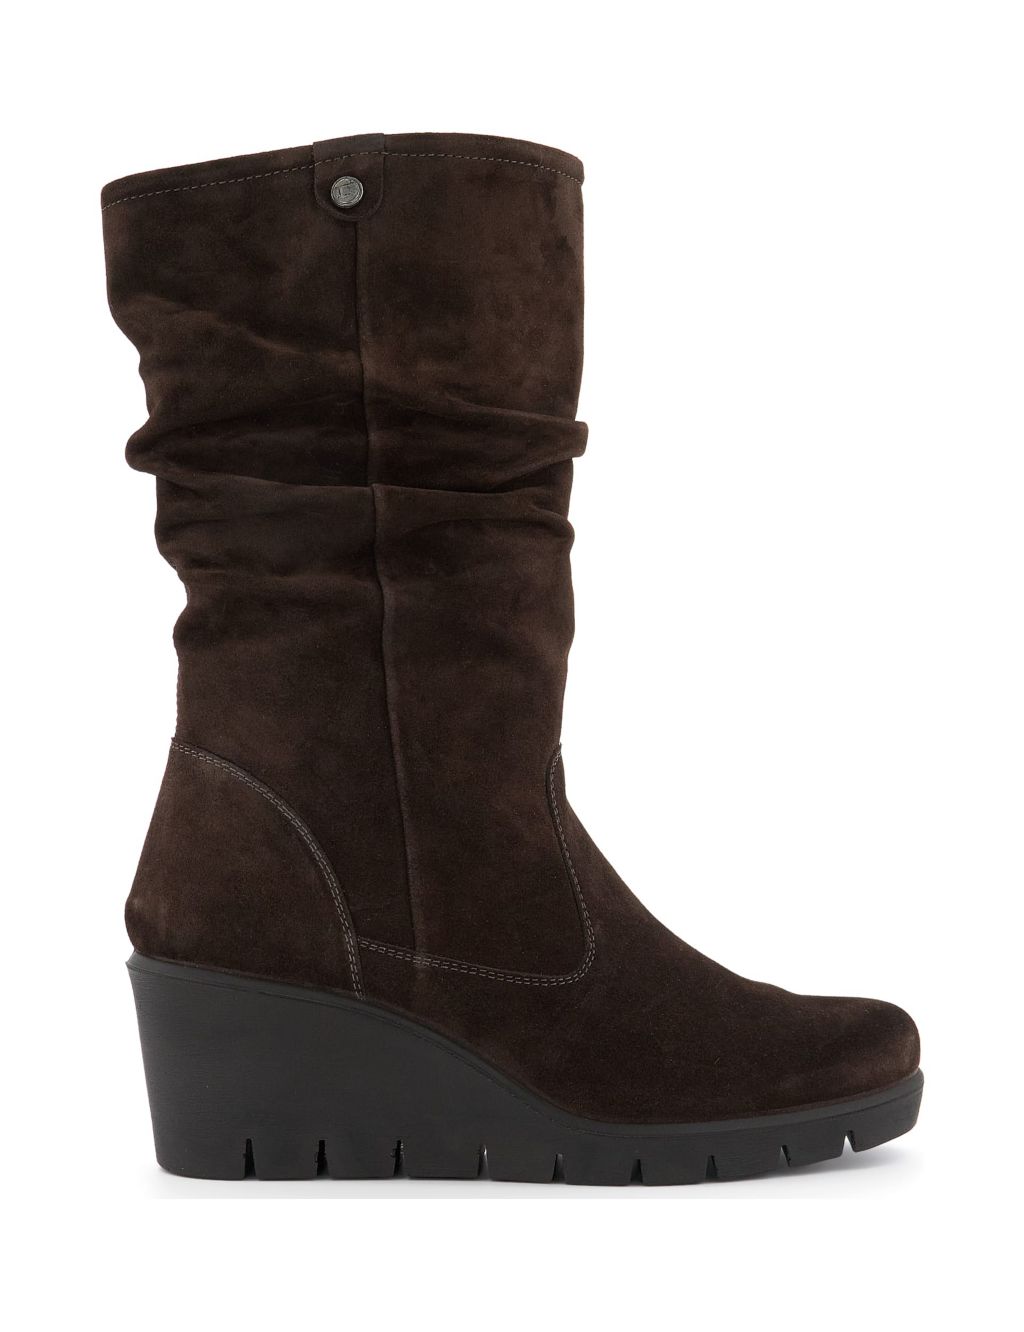 Suede Ruched Wedge Round Toe Boots image 1